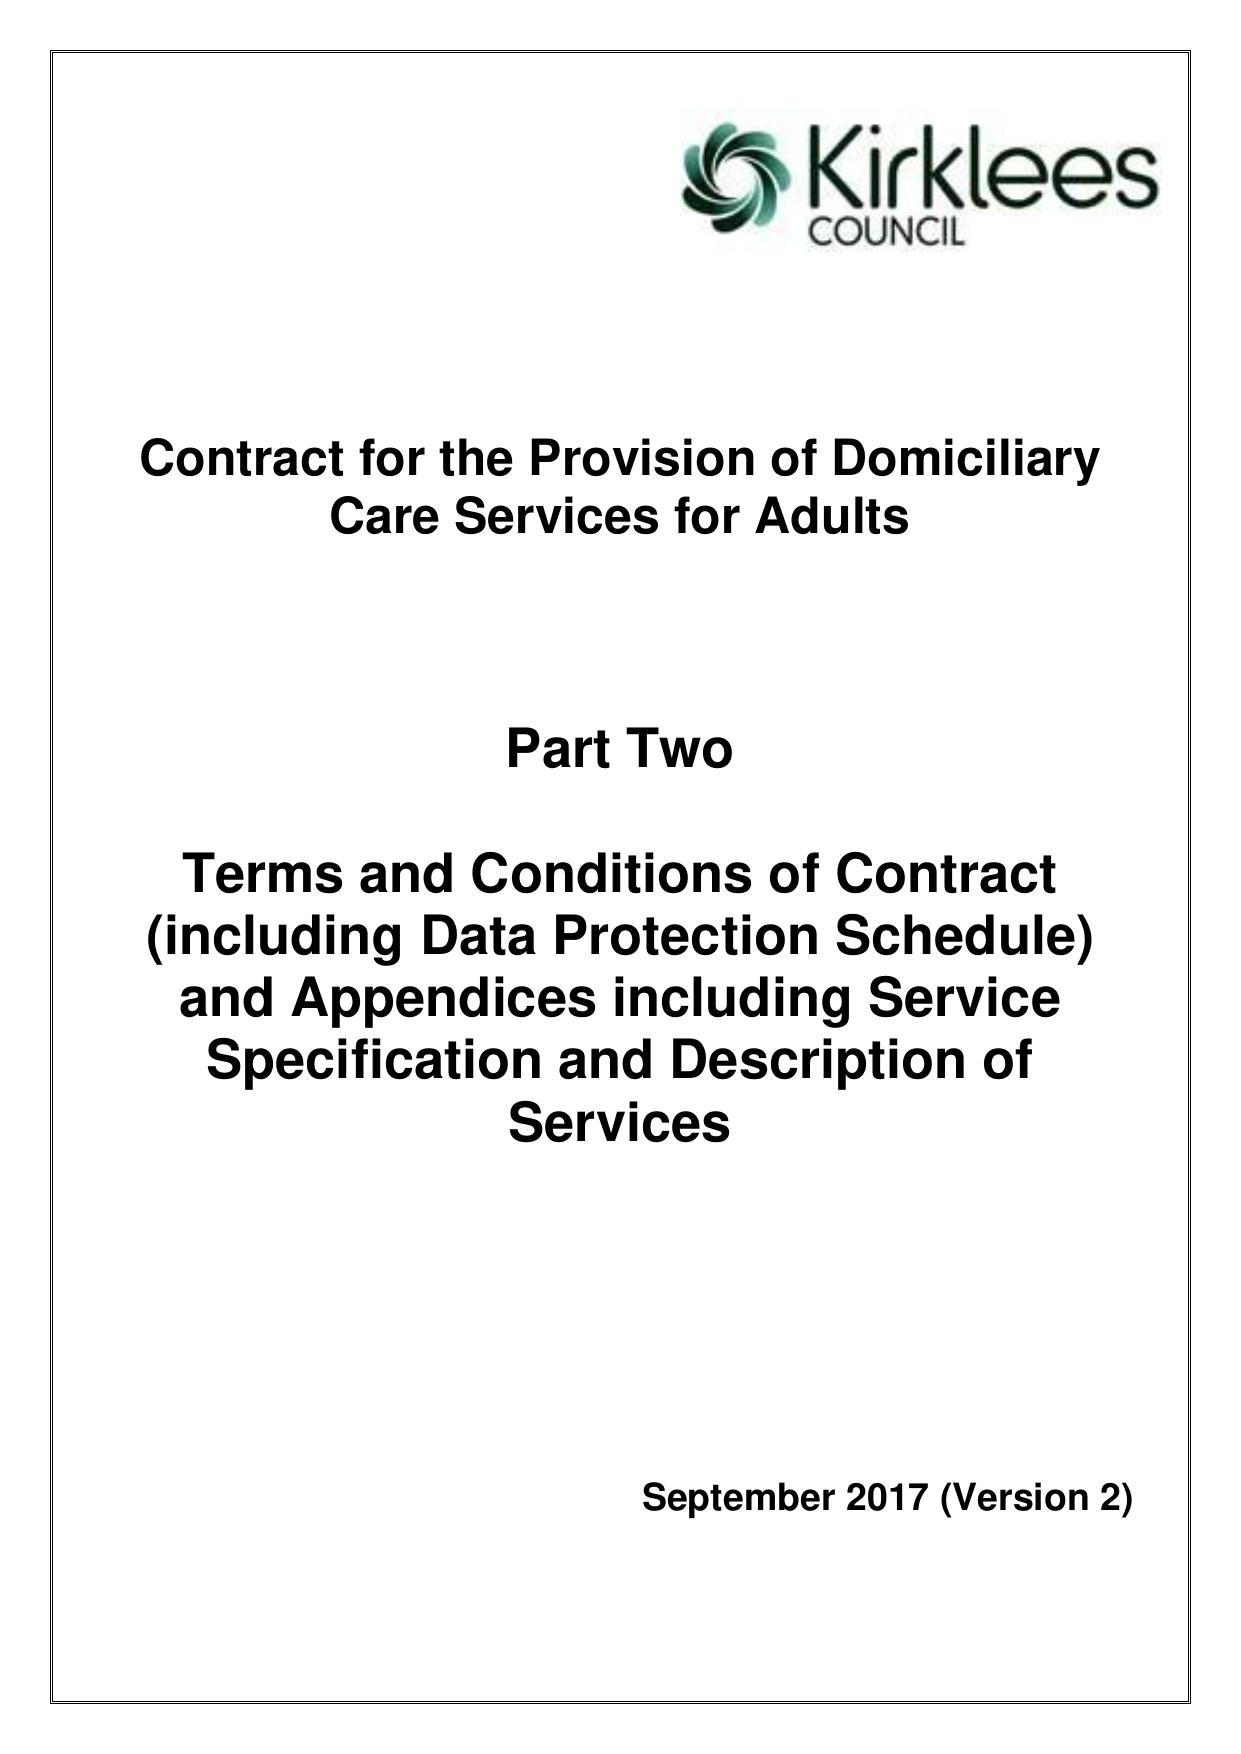 Tender Document for Provision of Domiciliary Care Services for Adults Terms and Conditions